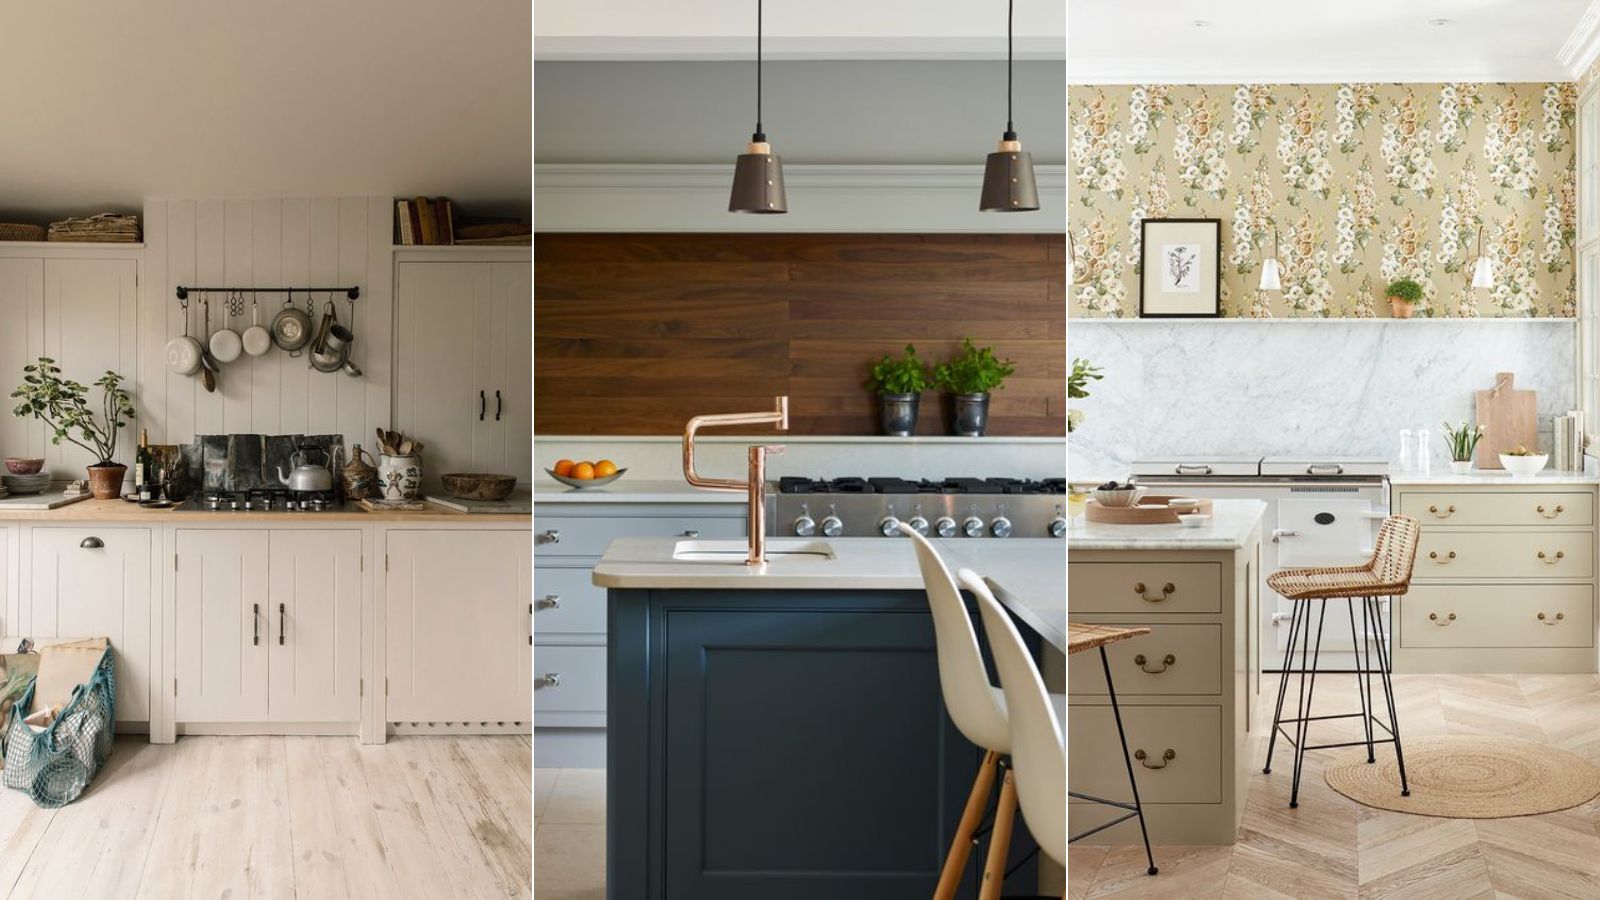 House & Home - Vote For Your Favorite House & Home Kitchen of 2021!